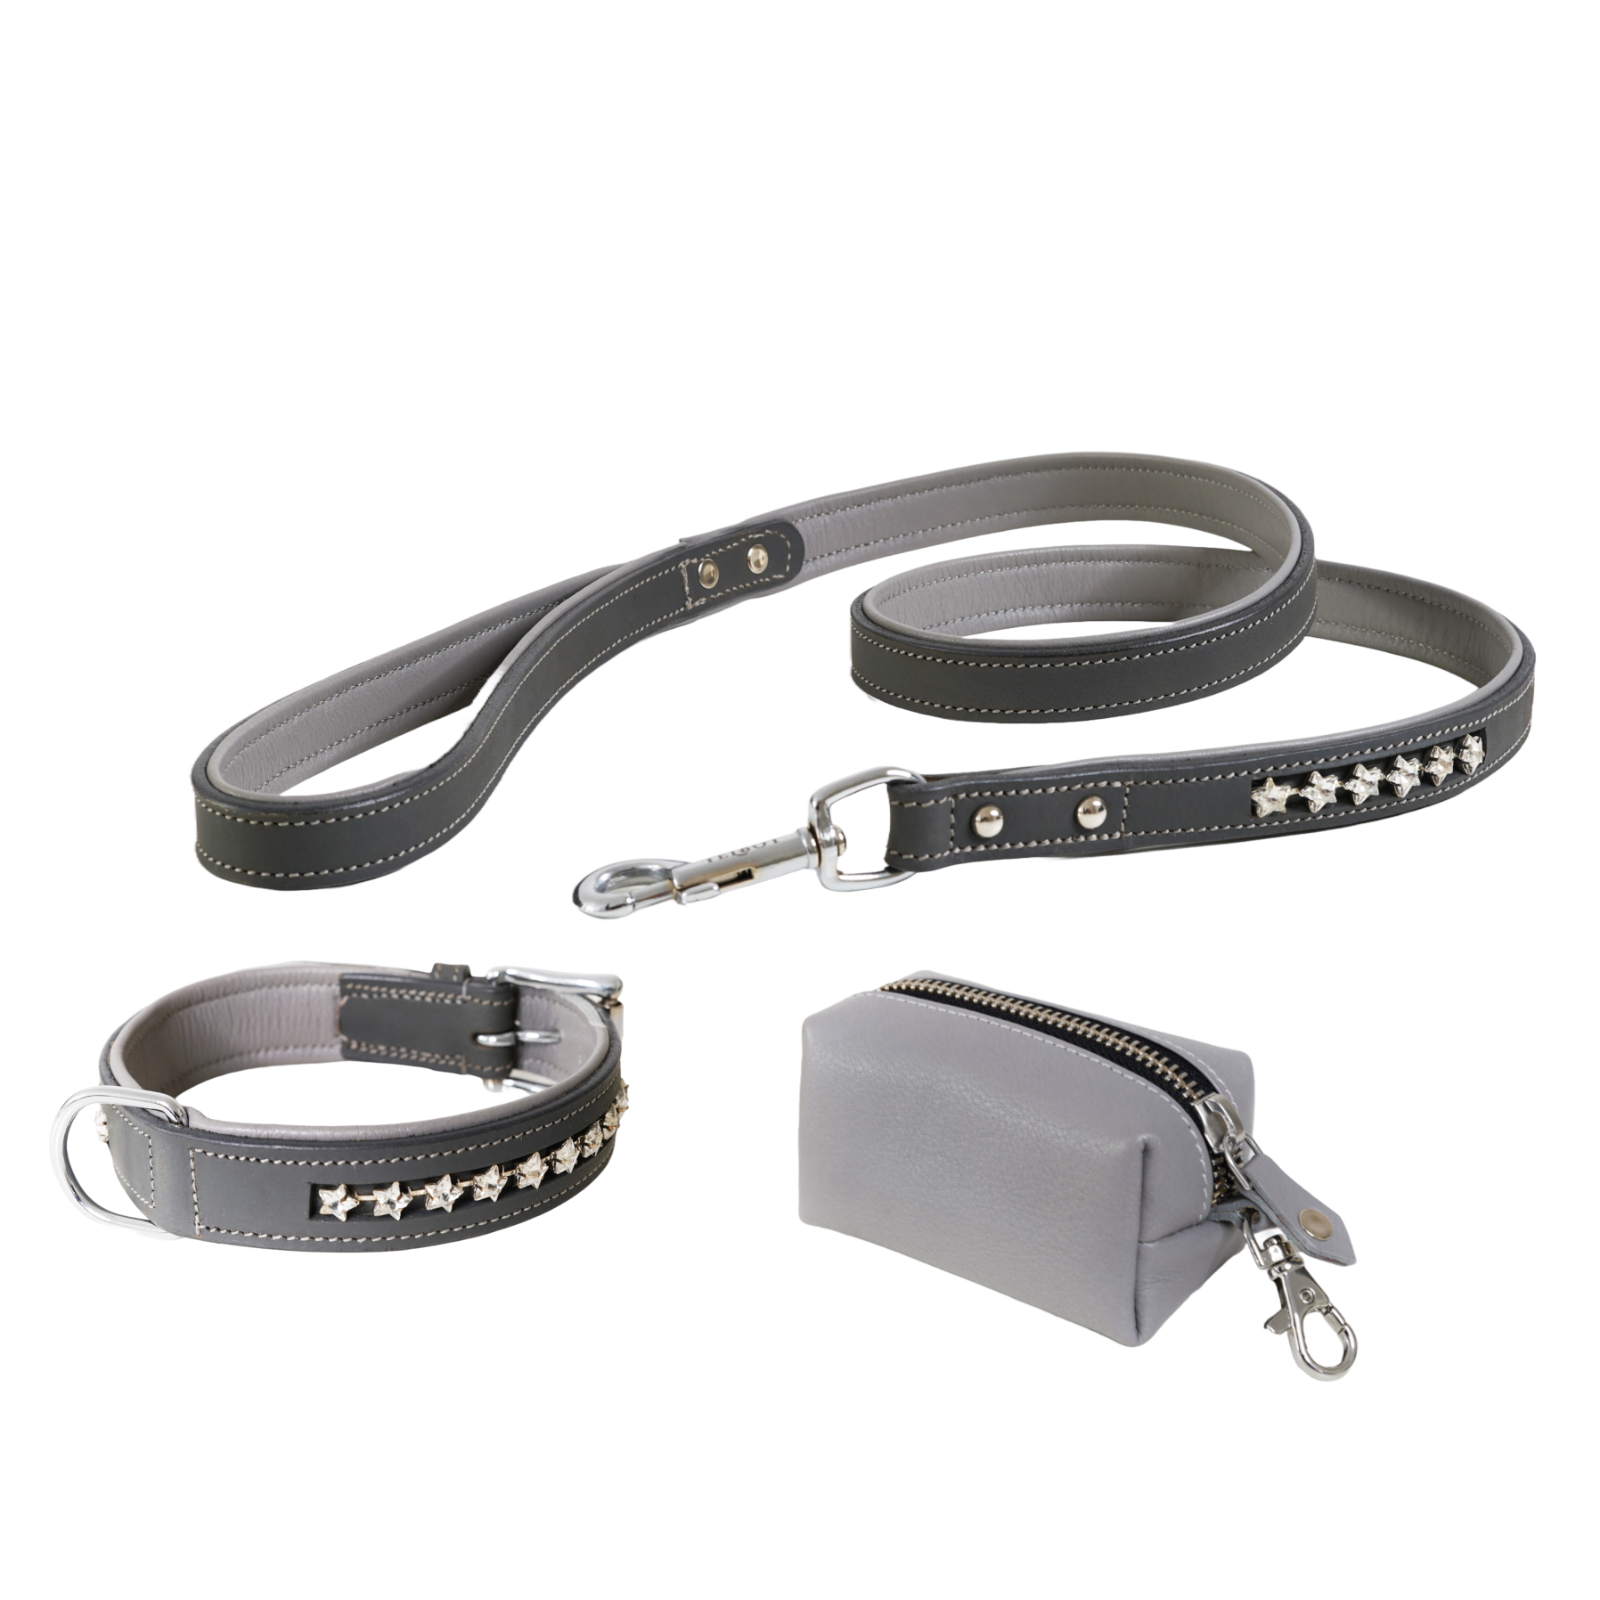 Primary image for Genuine Leather Dog Padded Collar & Leash 6ft & Poo Bag. Handmade. S-XL sizes.